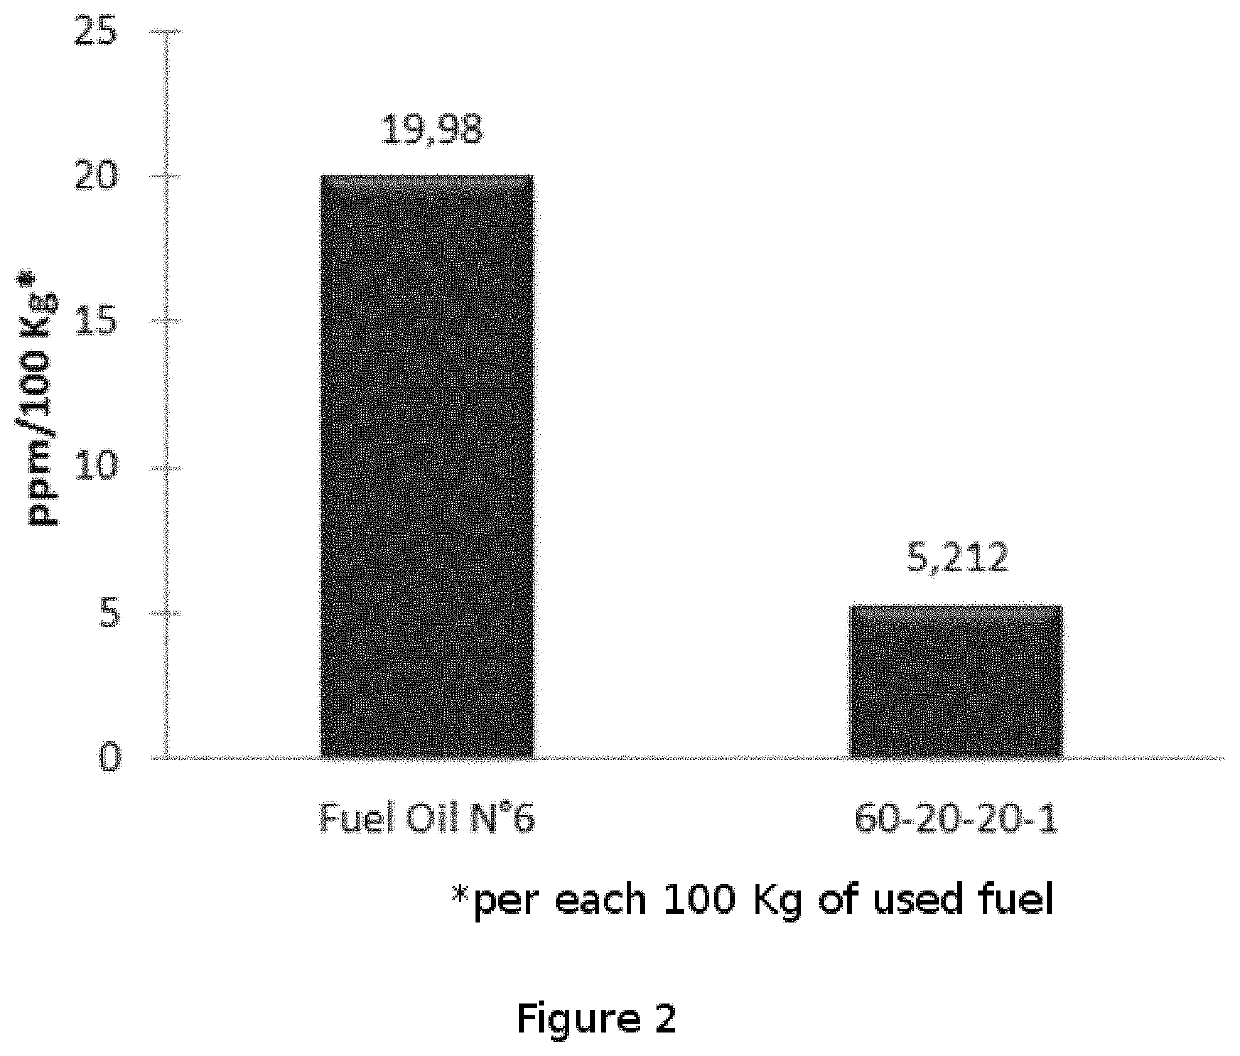 Bio-additive for heavy oils, which comprises rapeseed oil methyl esters, surfactants, diluents and metal oxides, and use thereof for reducing polluting emissions and as a combustion efficiency bio-enhancer for heavy oils